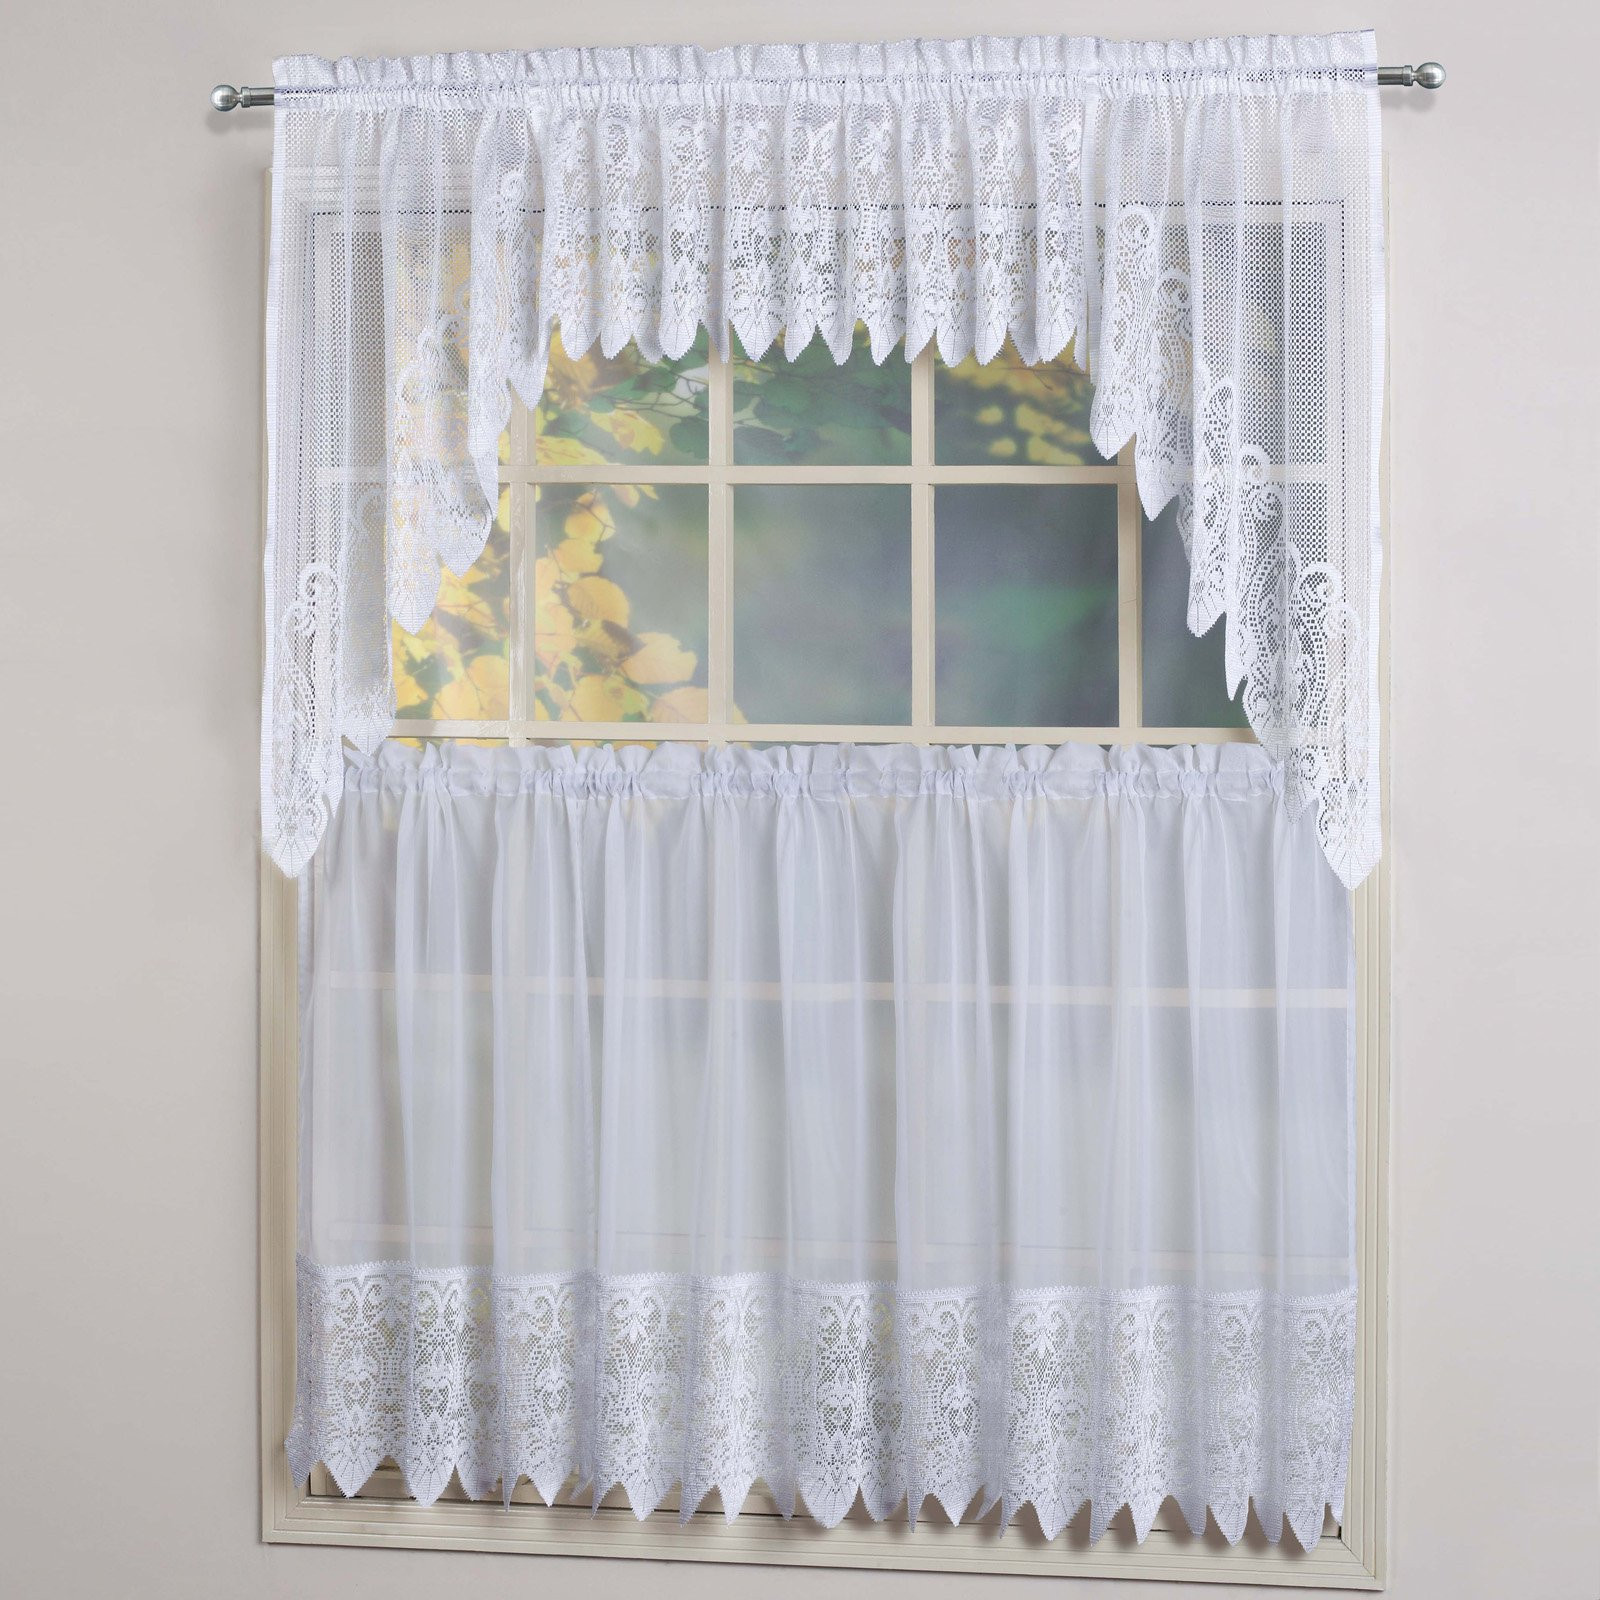 Kitchen Curtain Swag
 United Curtain Valerie Voile and Macrame Kitchen Swag